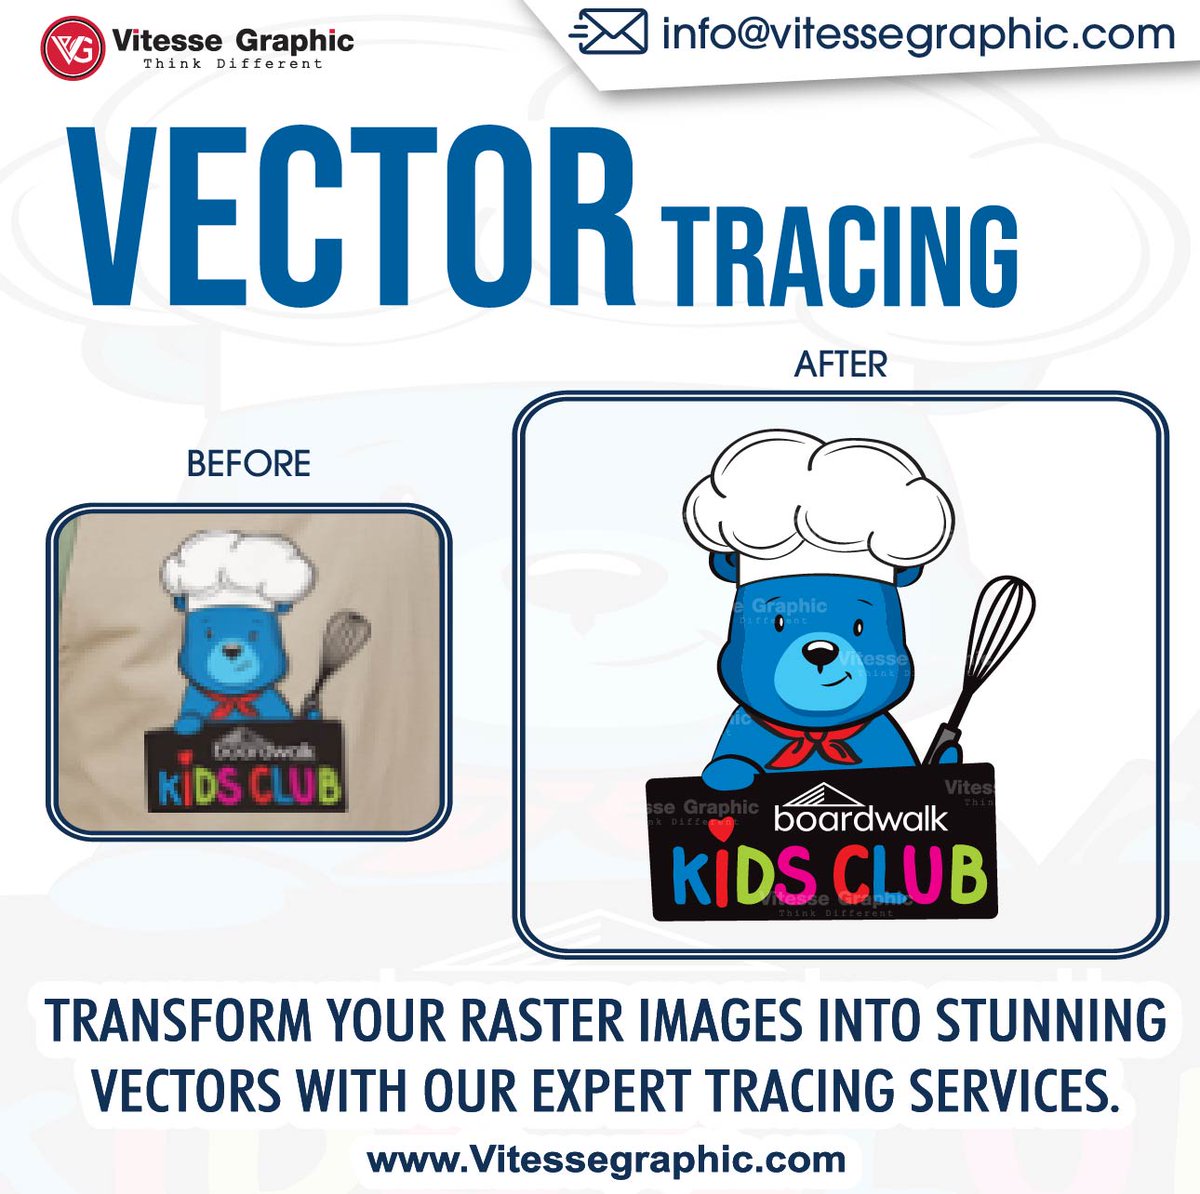 VECTOR TRACING
Transform your raster images into stunning vectors with our expert tracing services. Email: info@vitessegraphic.com #vectortracing #vectordesign #vectorart #vectorconversion #imagetracing #vectorgraphic #vectorizing #vectorize #vectorizat #designservices #vectorize